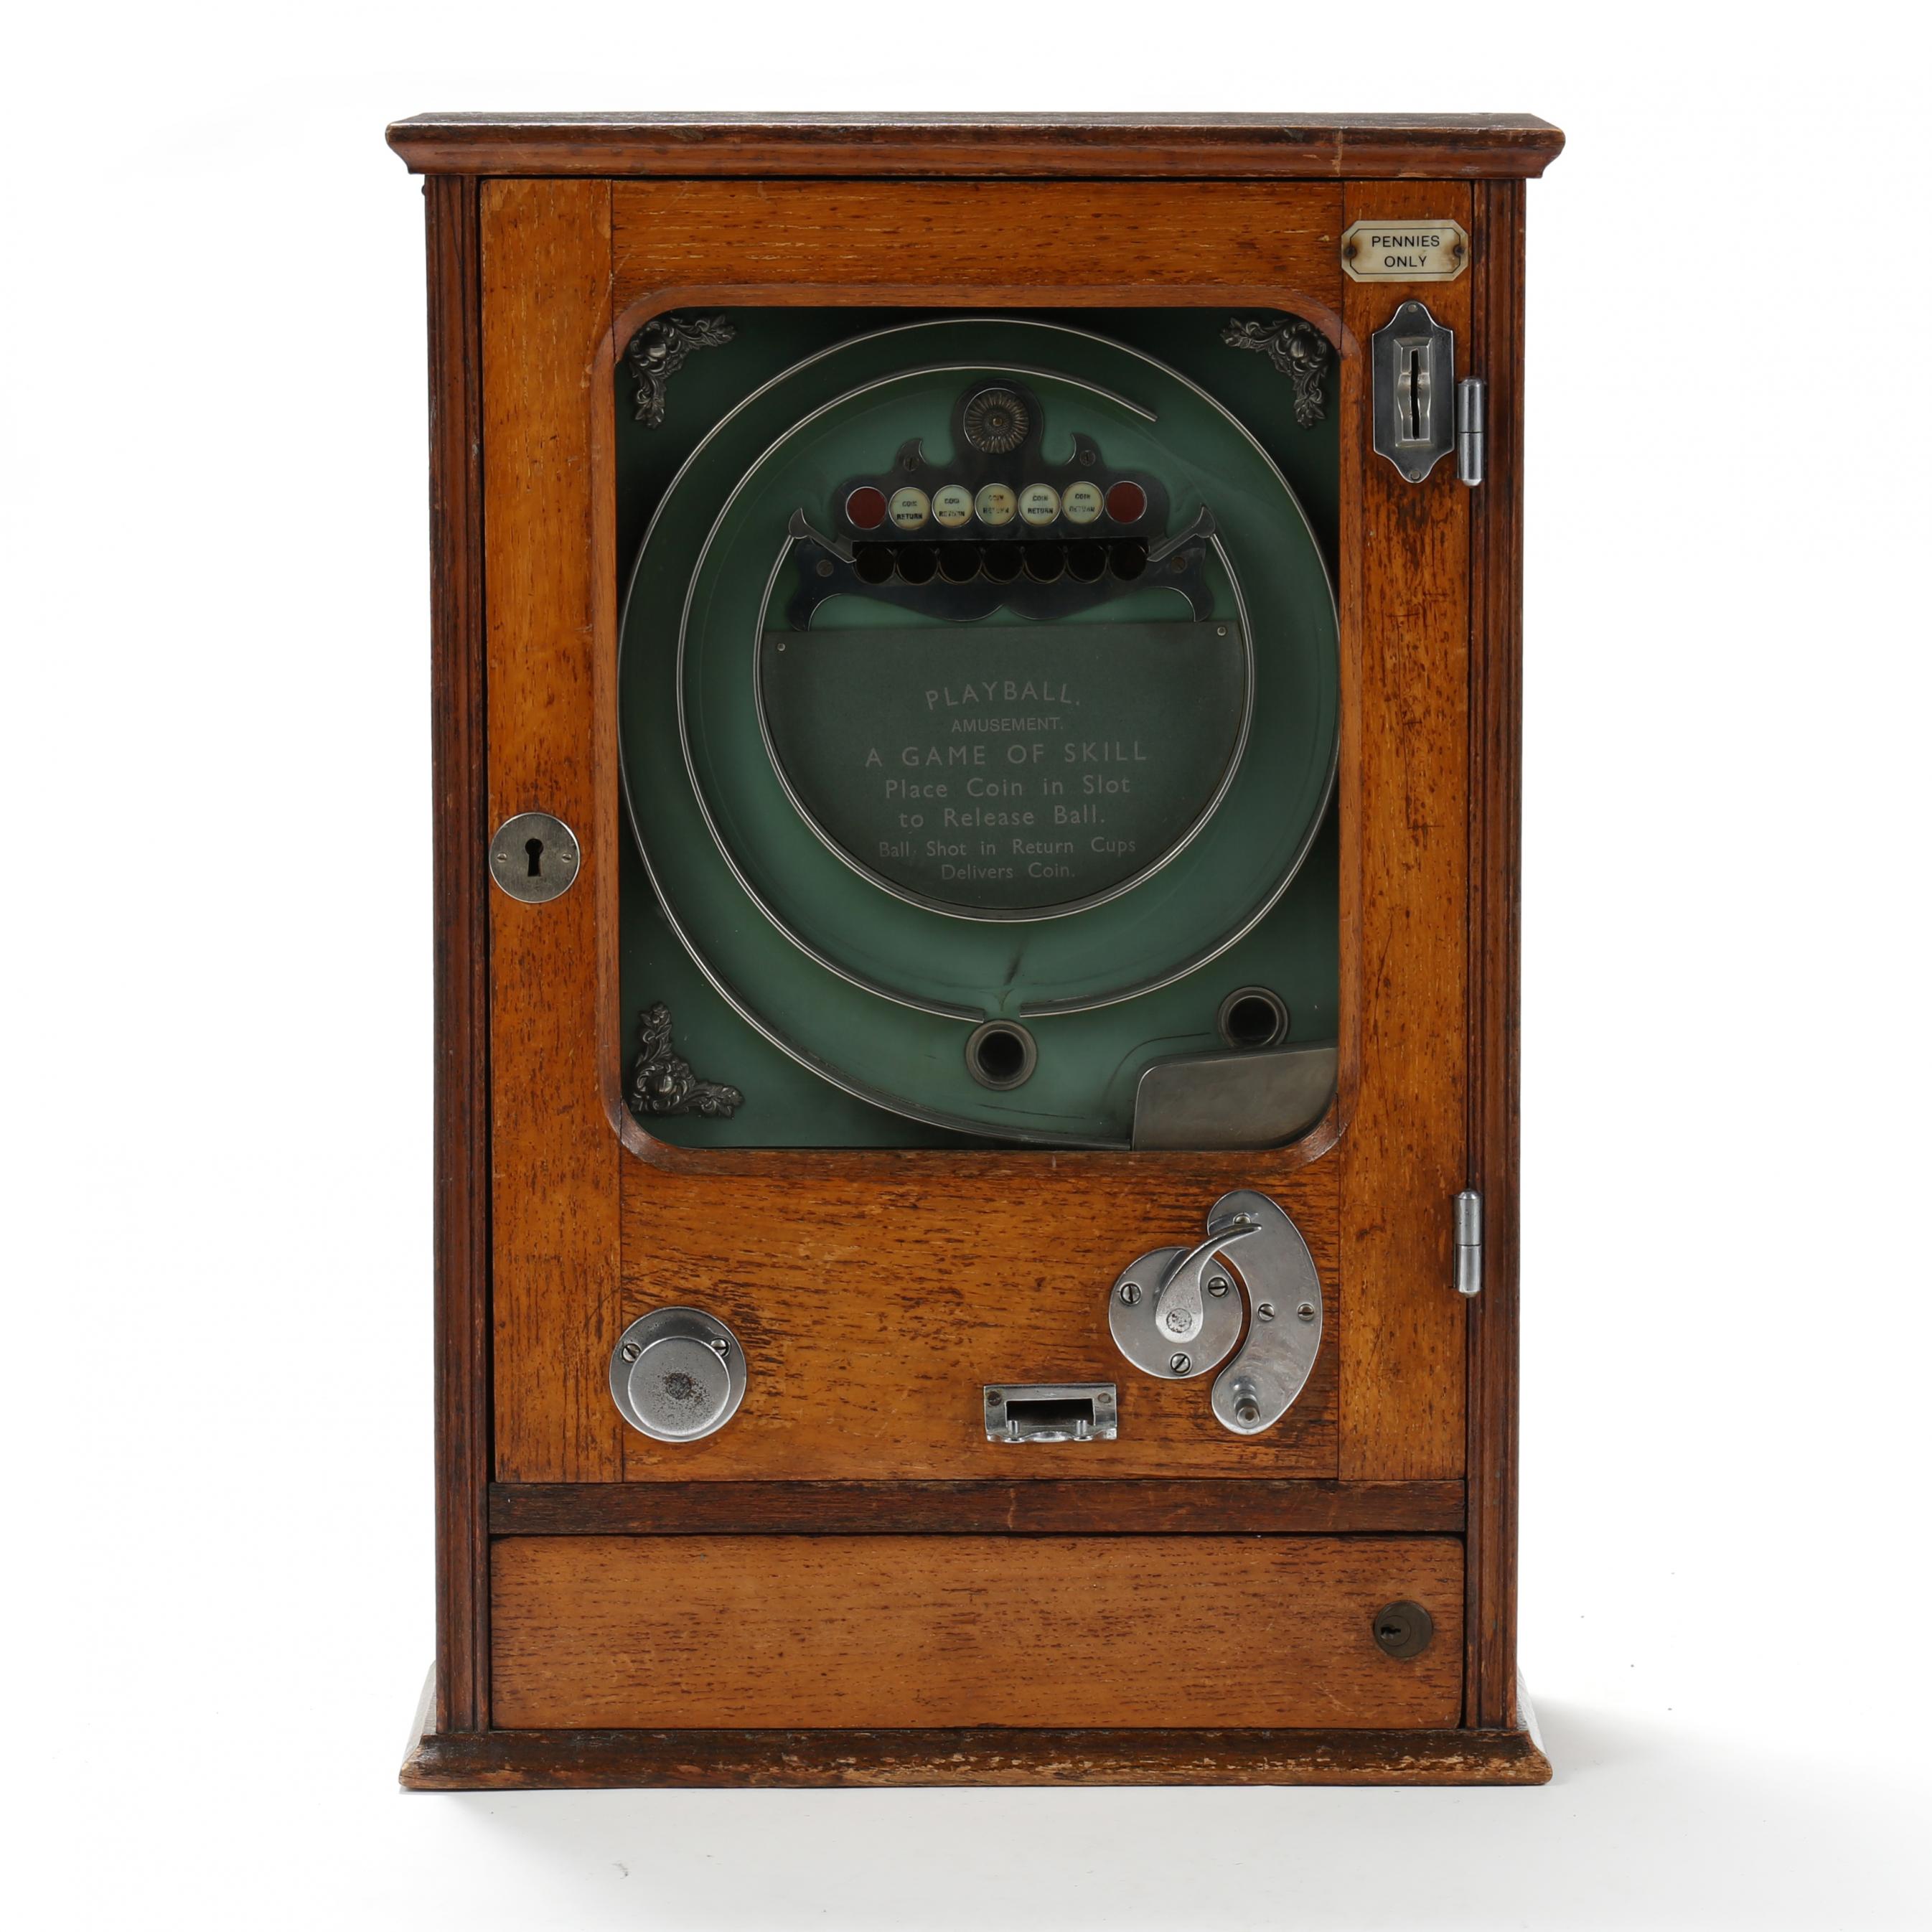 A Playball Penny Slot Machine Game (Lot 311 - October Estate